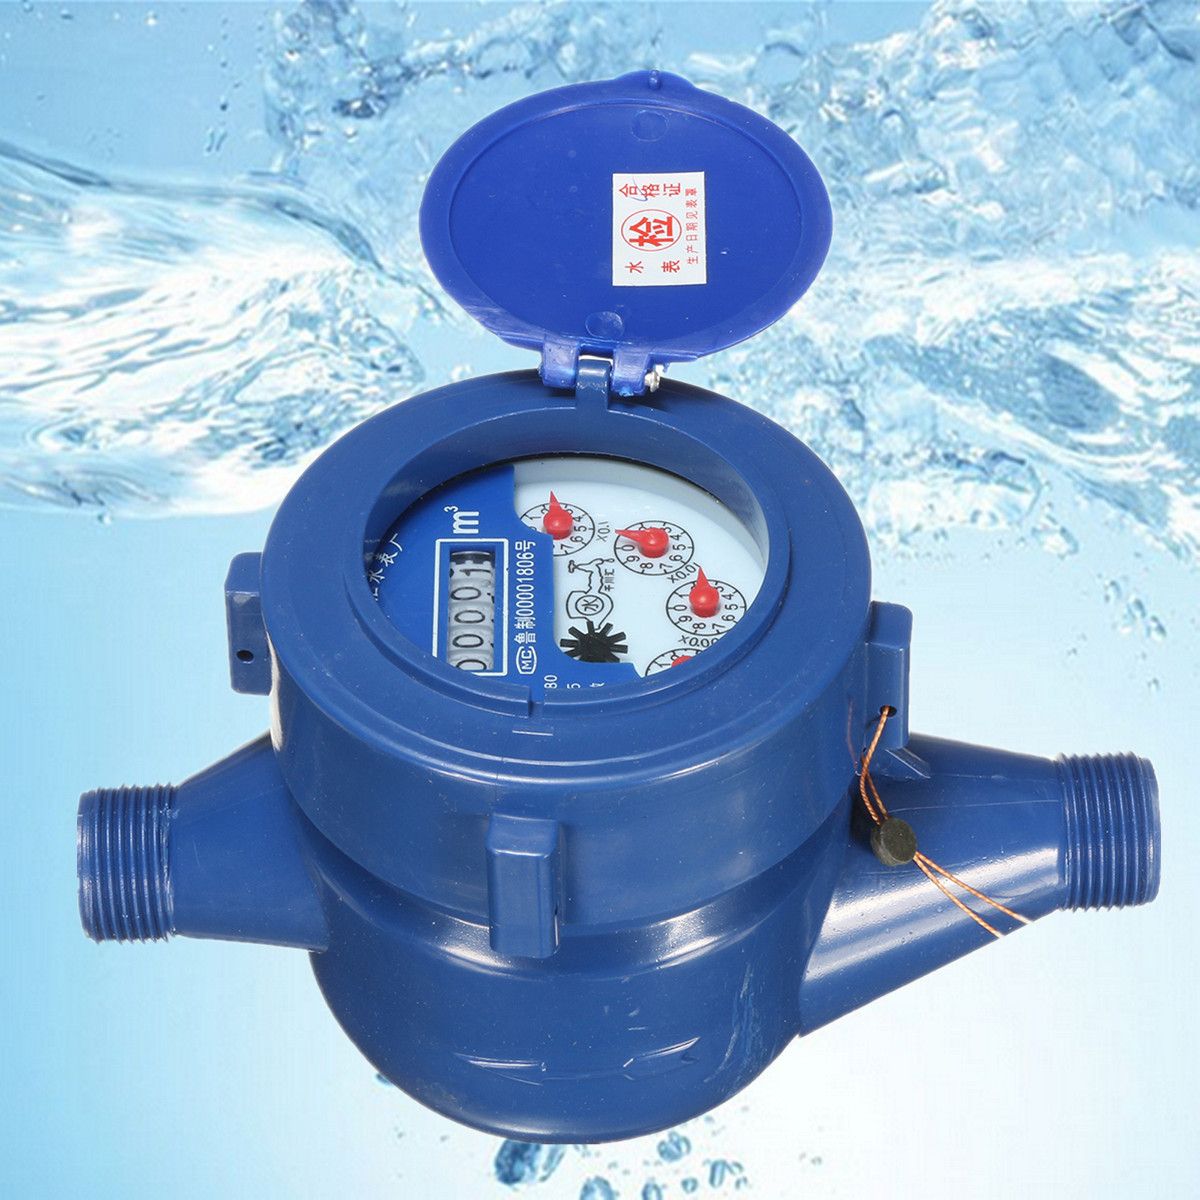 15mm-Plastic-Single-Flow-Dry-Cold-Water-Pipe-Table-Garden-Home-Water-Measuring-Meter-1299140